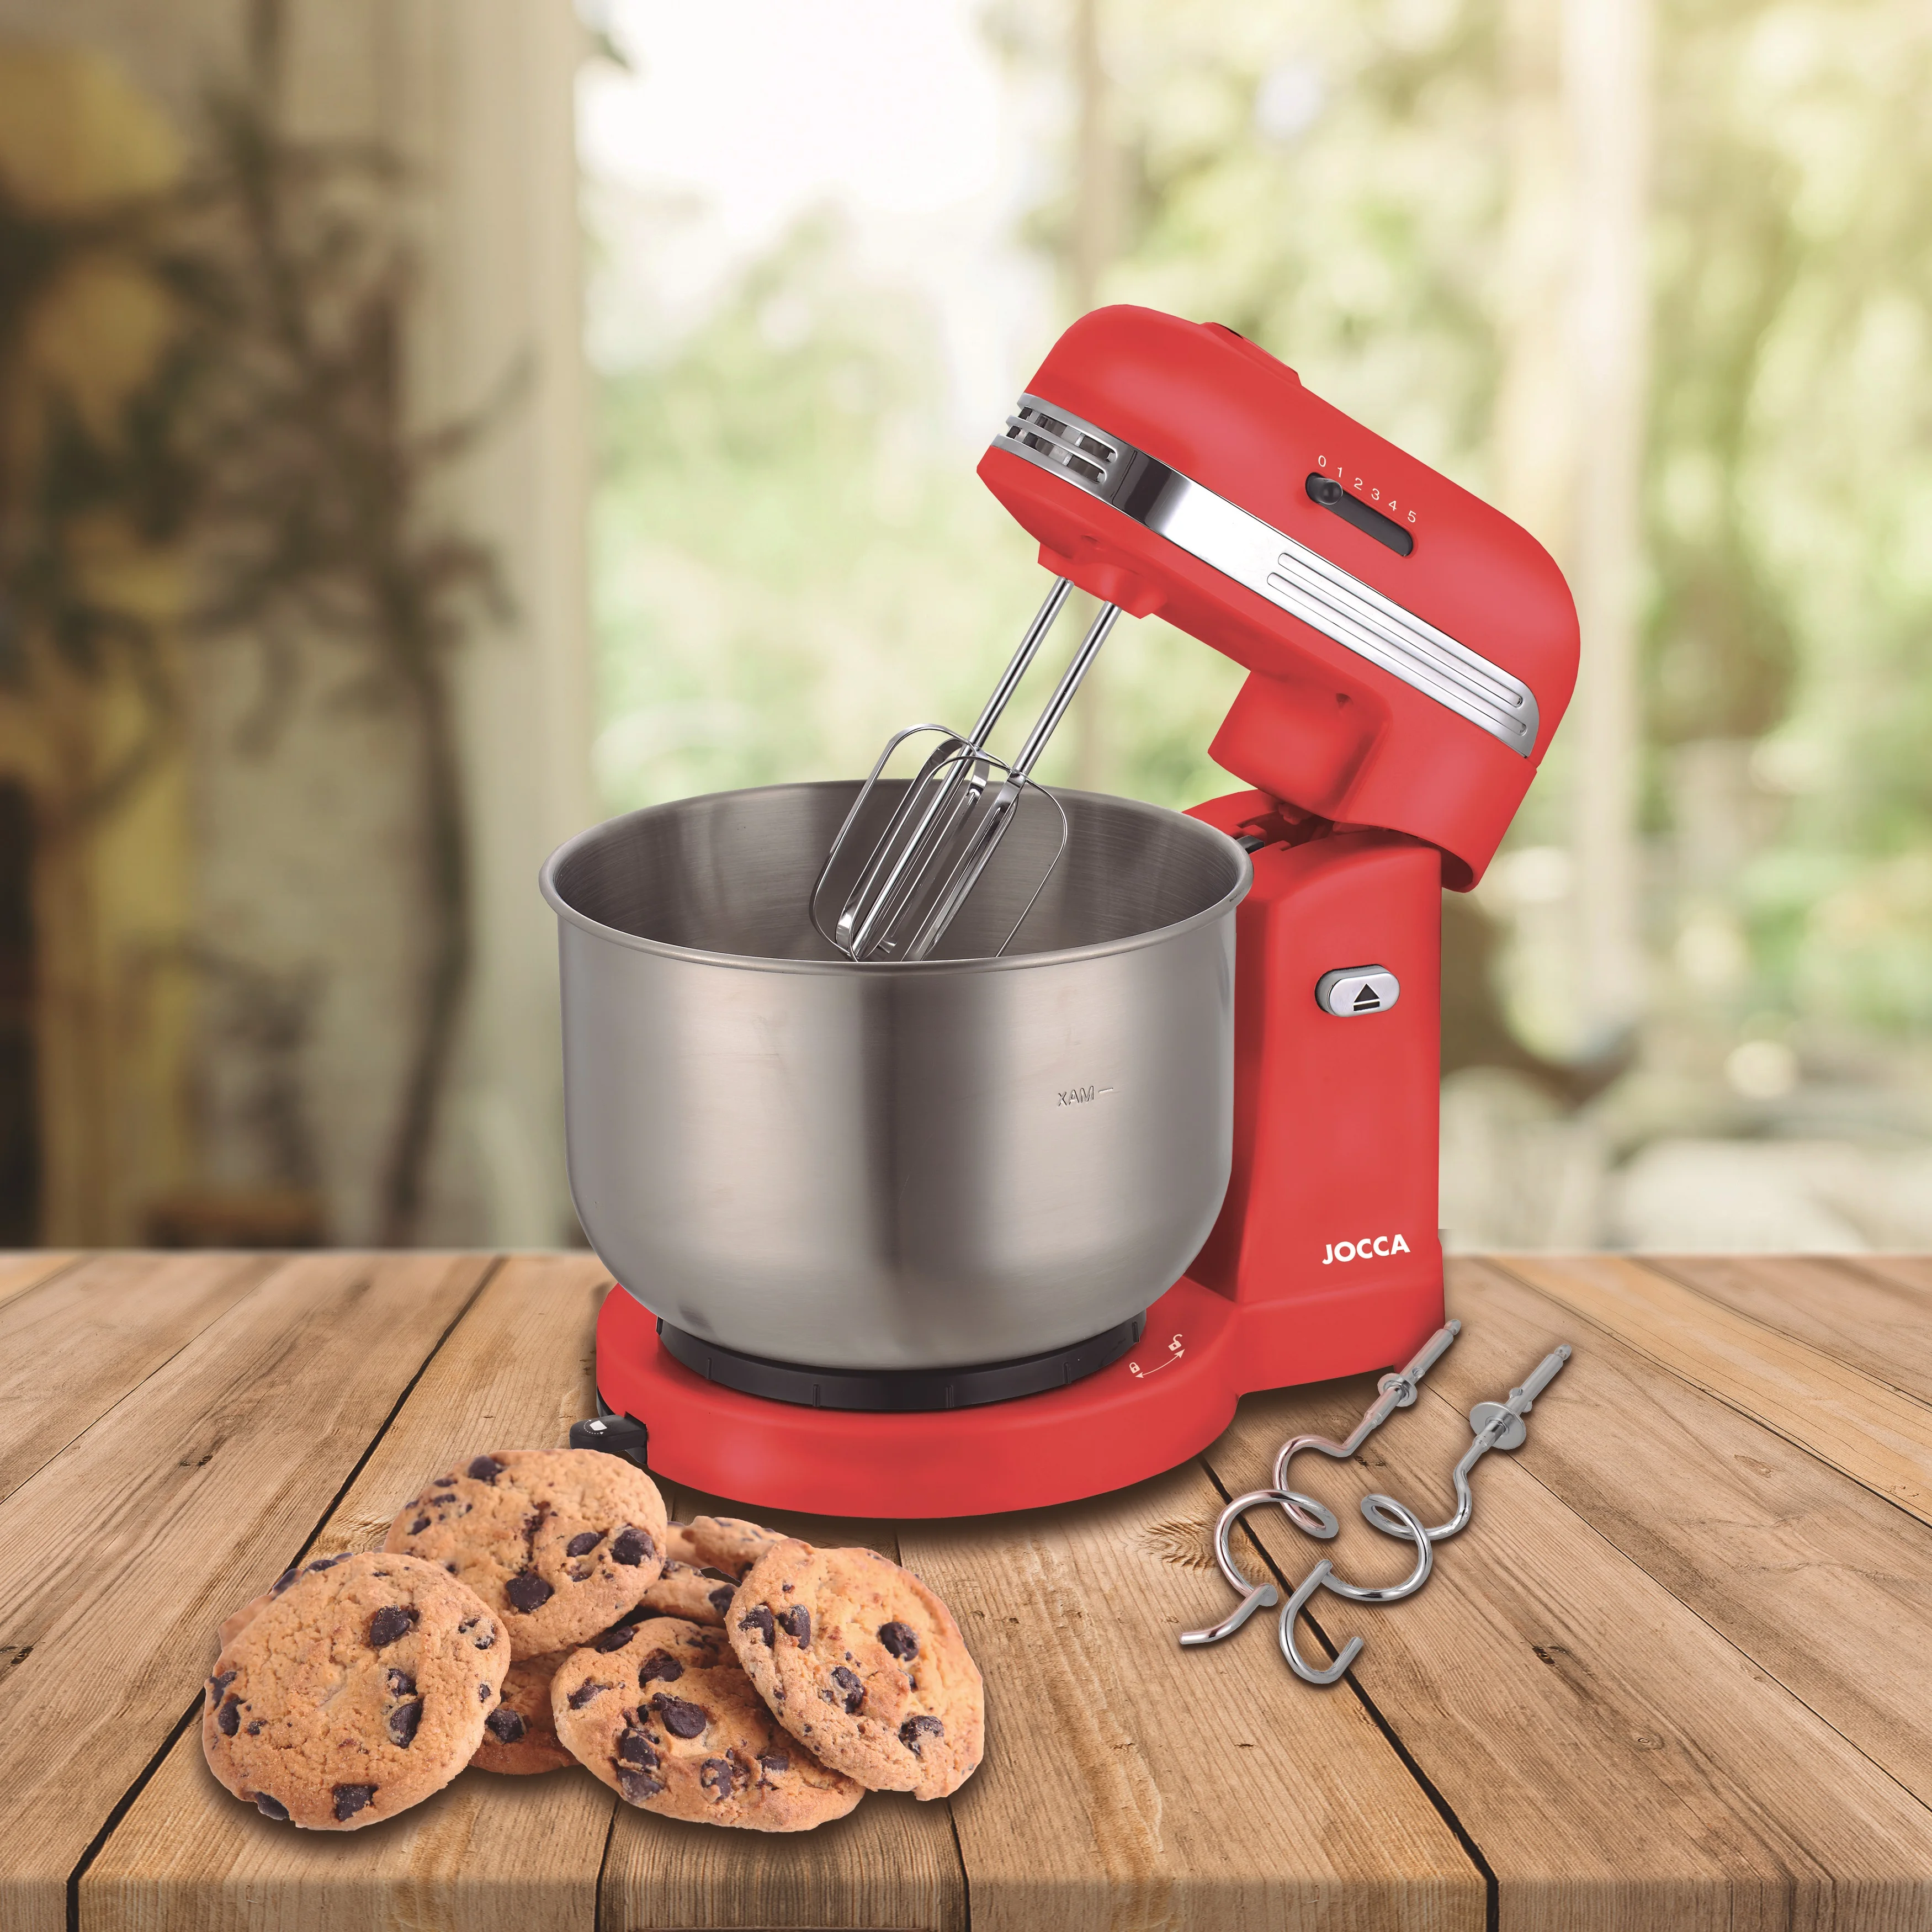 JOCCA mixer mixer with 3.5 litre stainless steel BOWL and self-rotation by friction, 350W power, 5 speeds, adjustable steering. Includes stick and sticker mixer